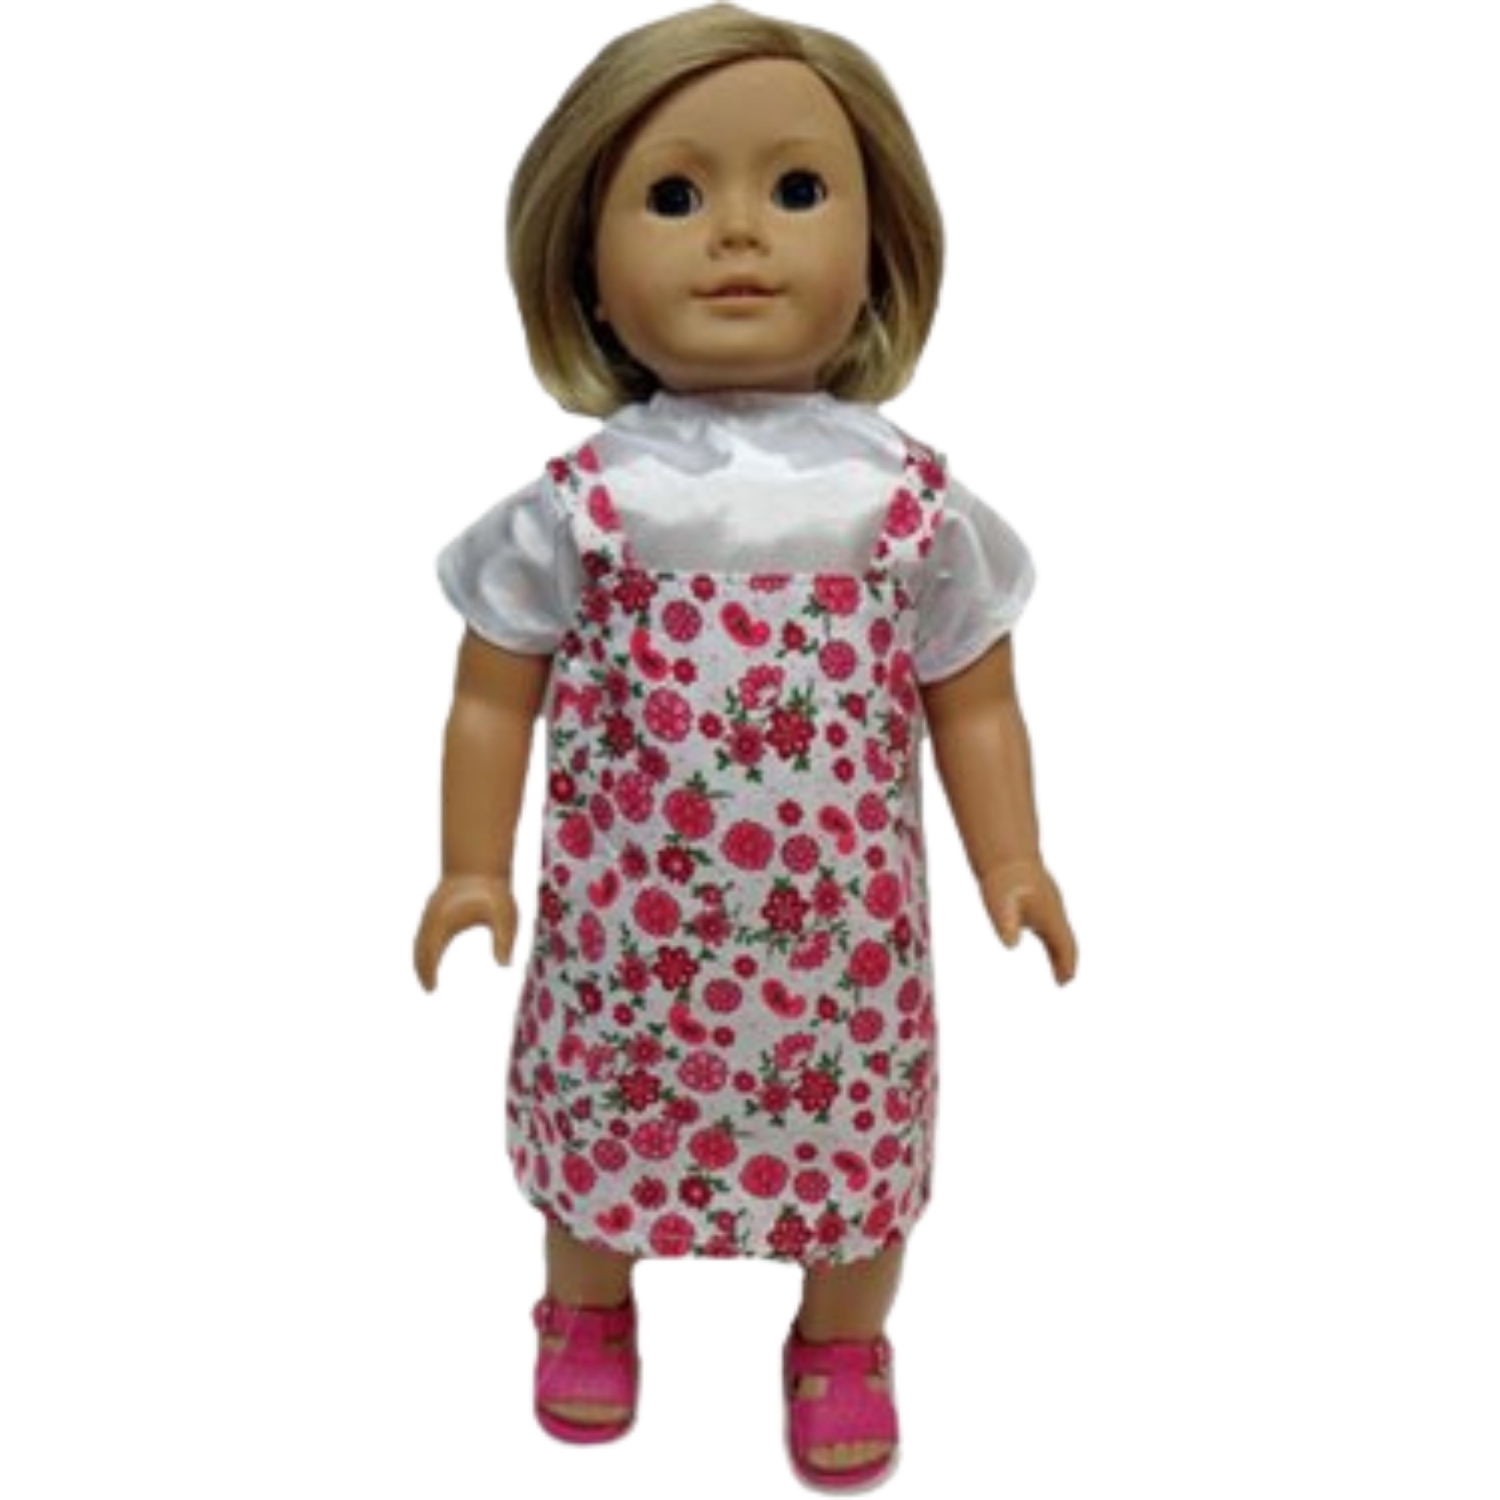 Doll Clothes Superstore Rose Jumper and Blouse Fits 18 Inch Dolls Like American Girl Our Generation My Life Dolls